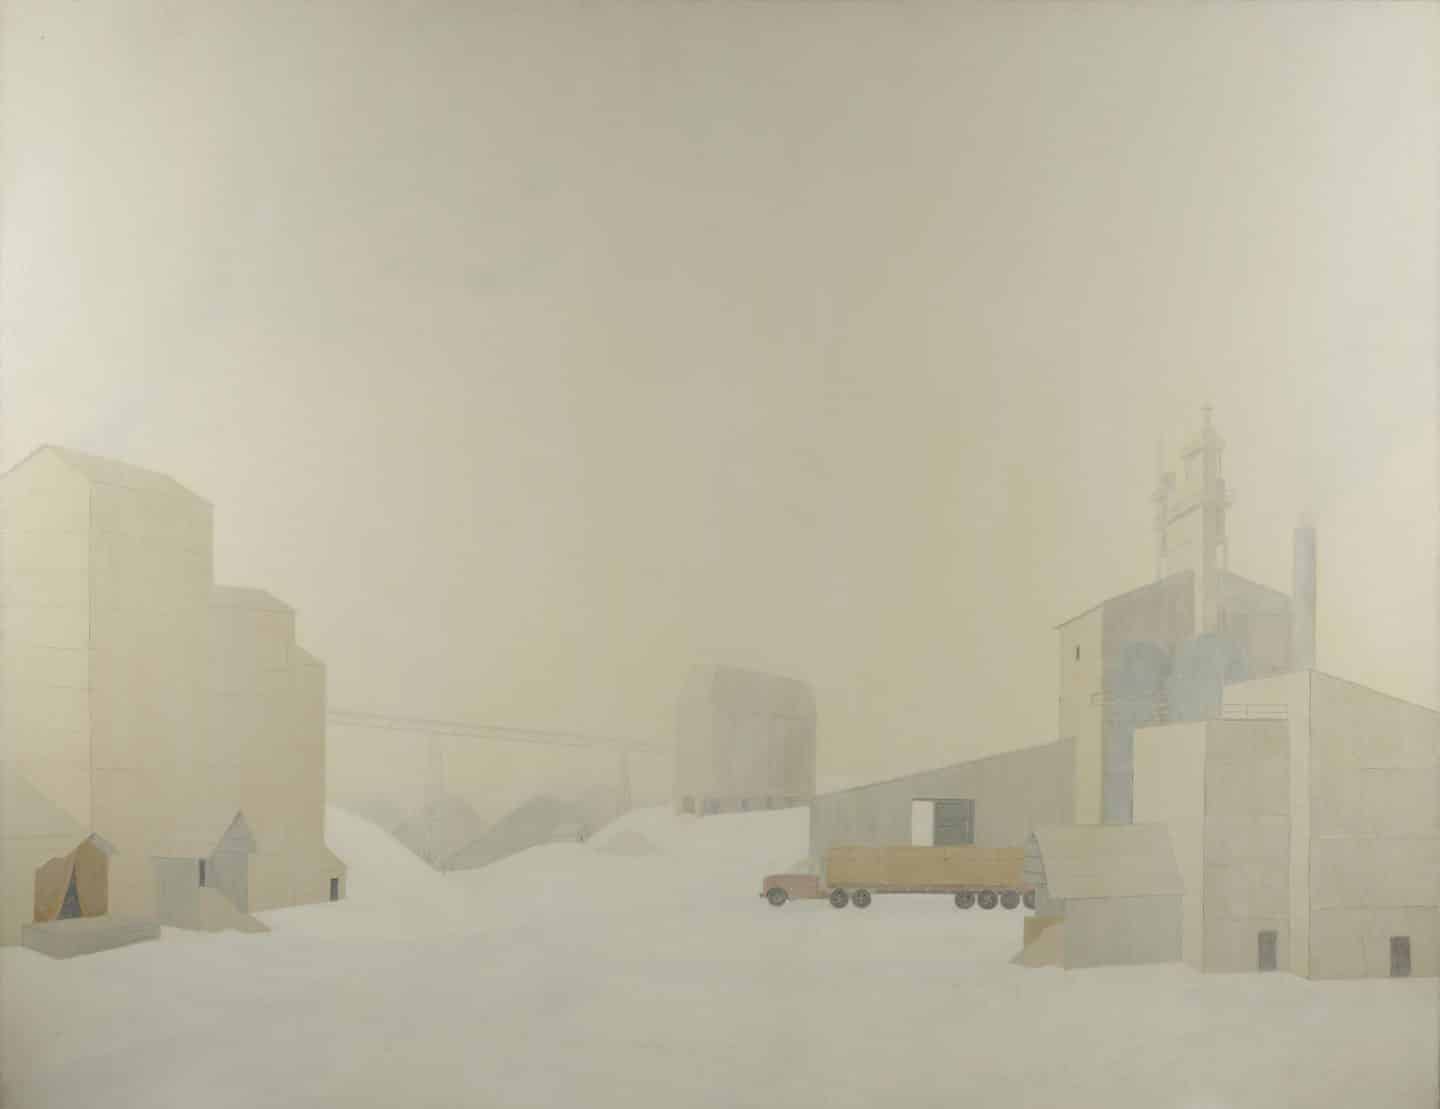 Kim Ondaatje, Domtar with Truck, 1970, acrylic and mixed media on canvas.